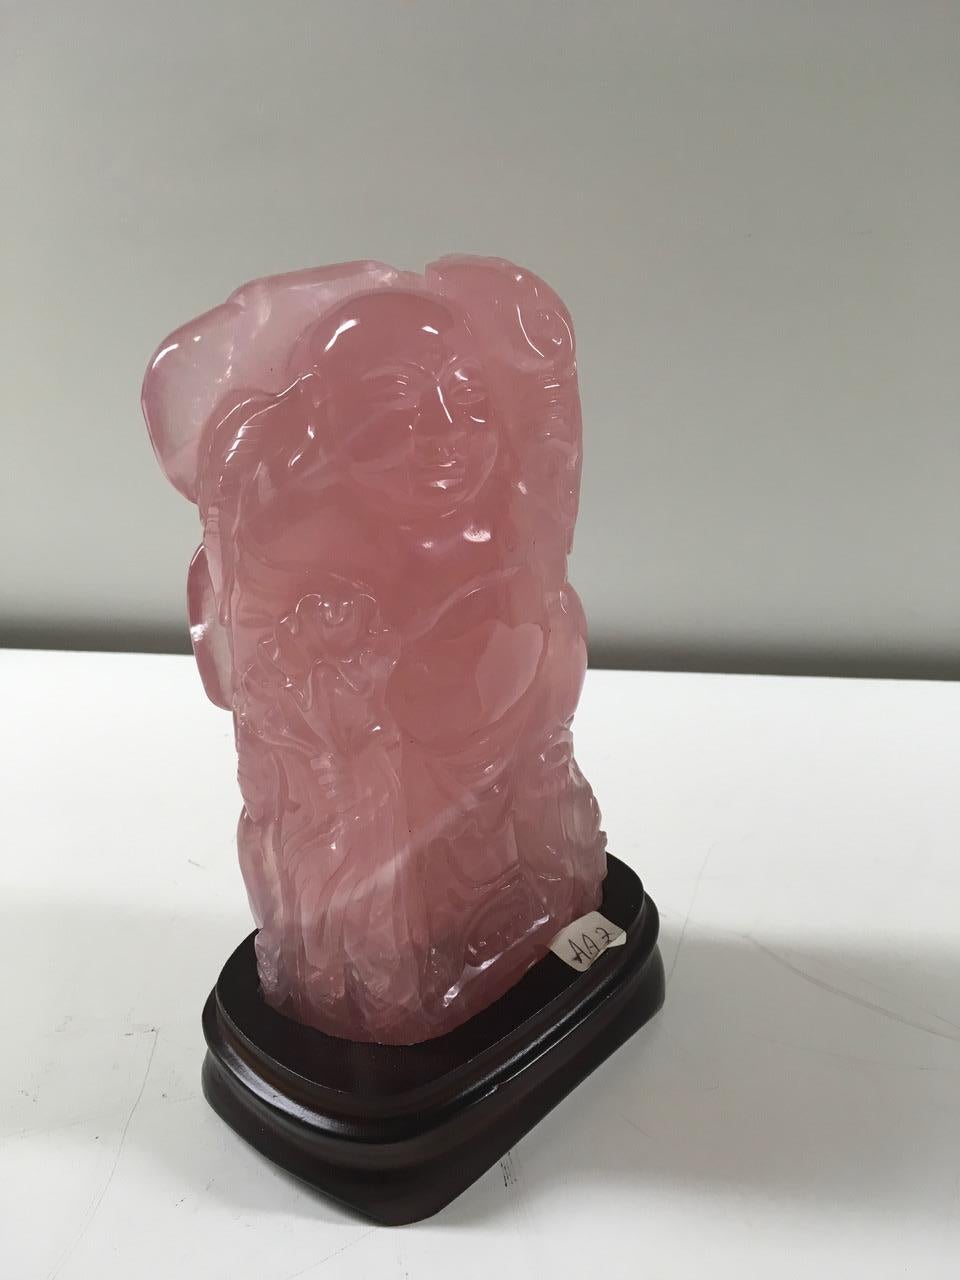 A beautiful sculpture in rose quartz with wooden base produced in China. Italian private collection. Weight 1.550 Kg.